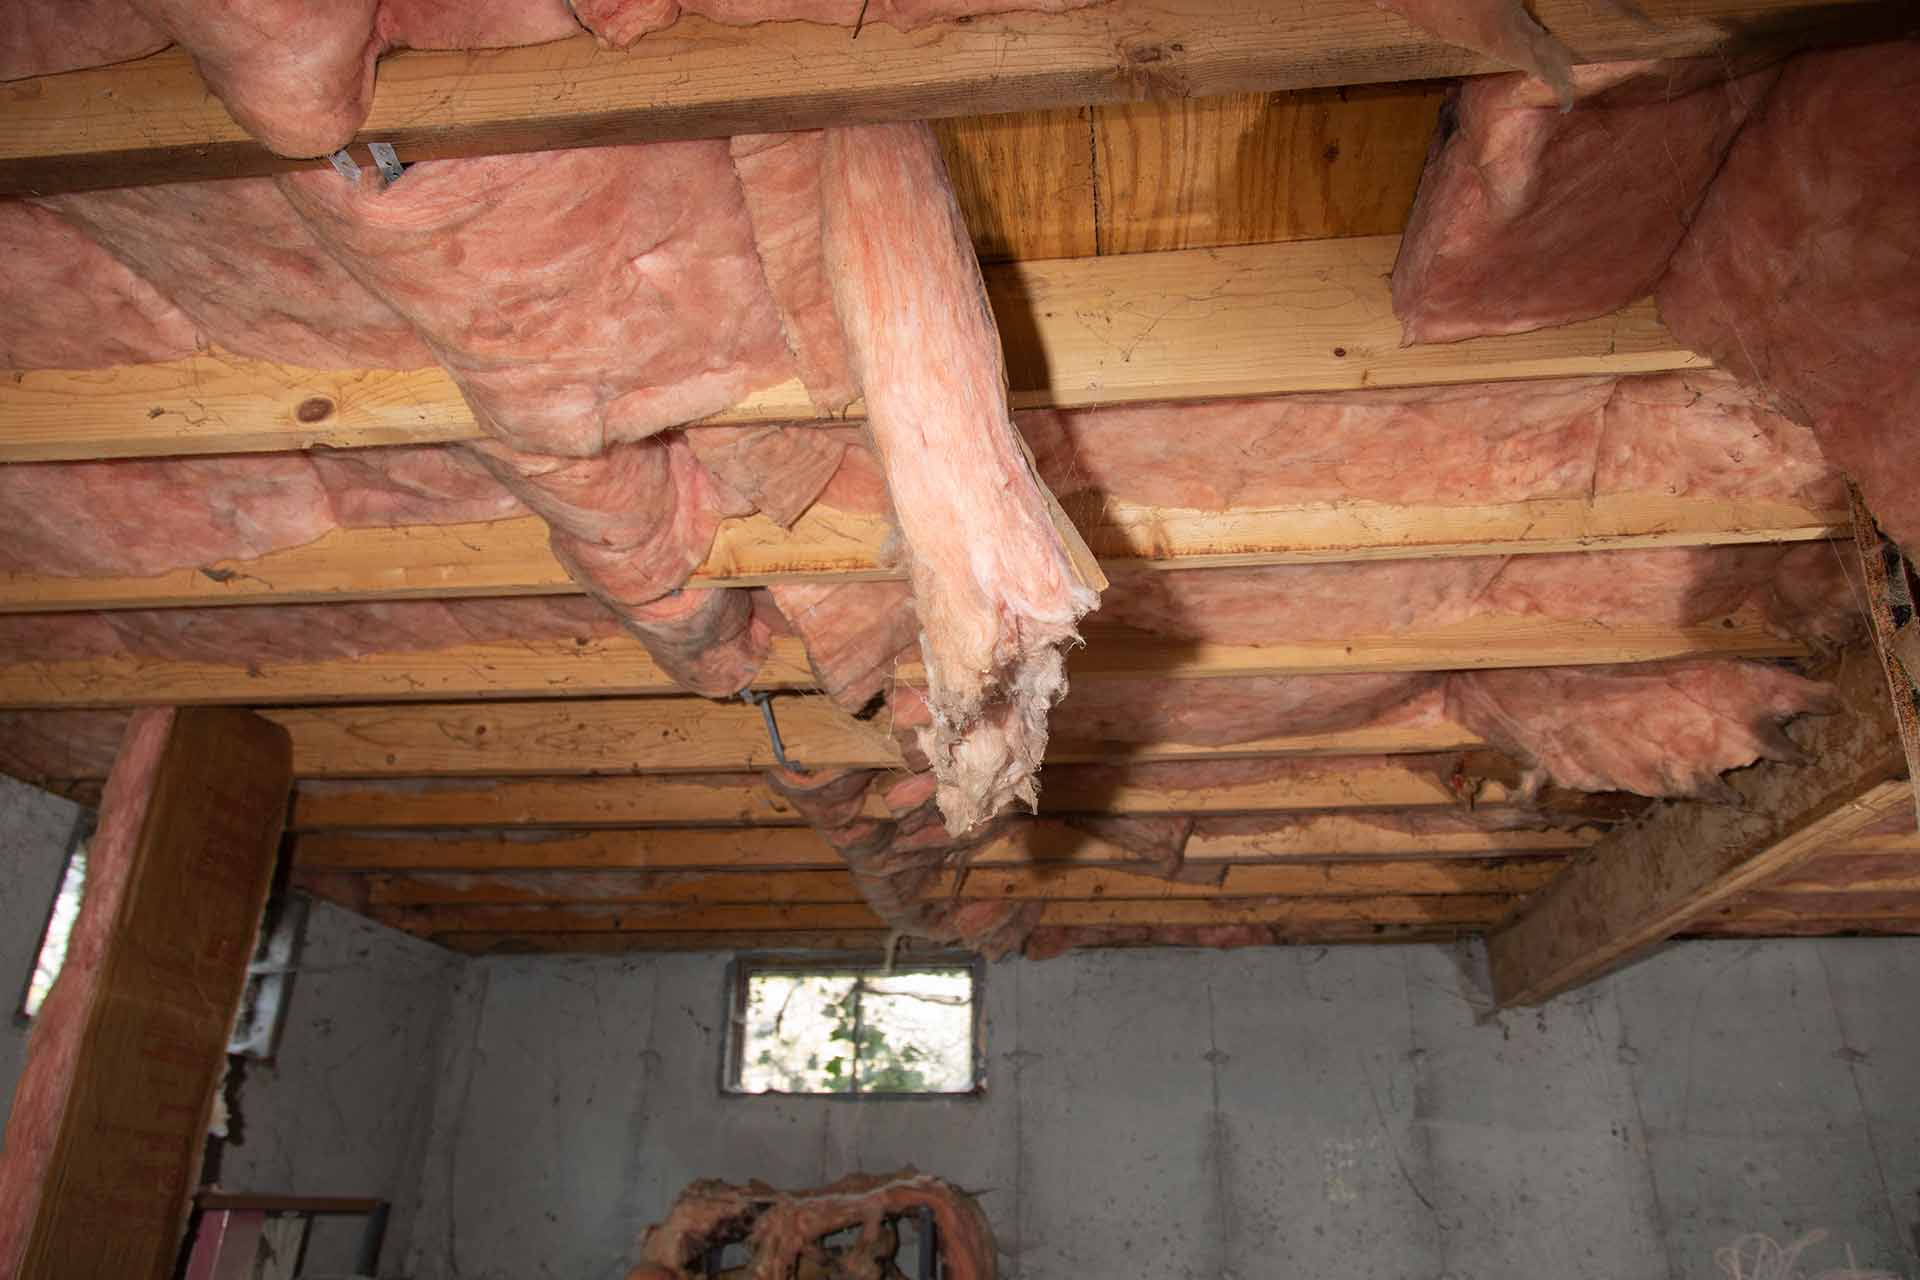 wet insulation in basement ceiling